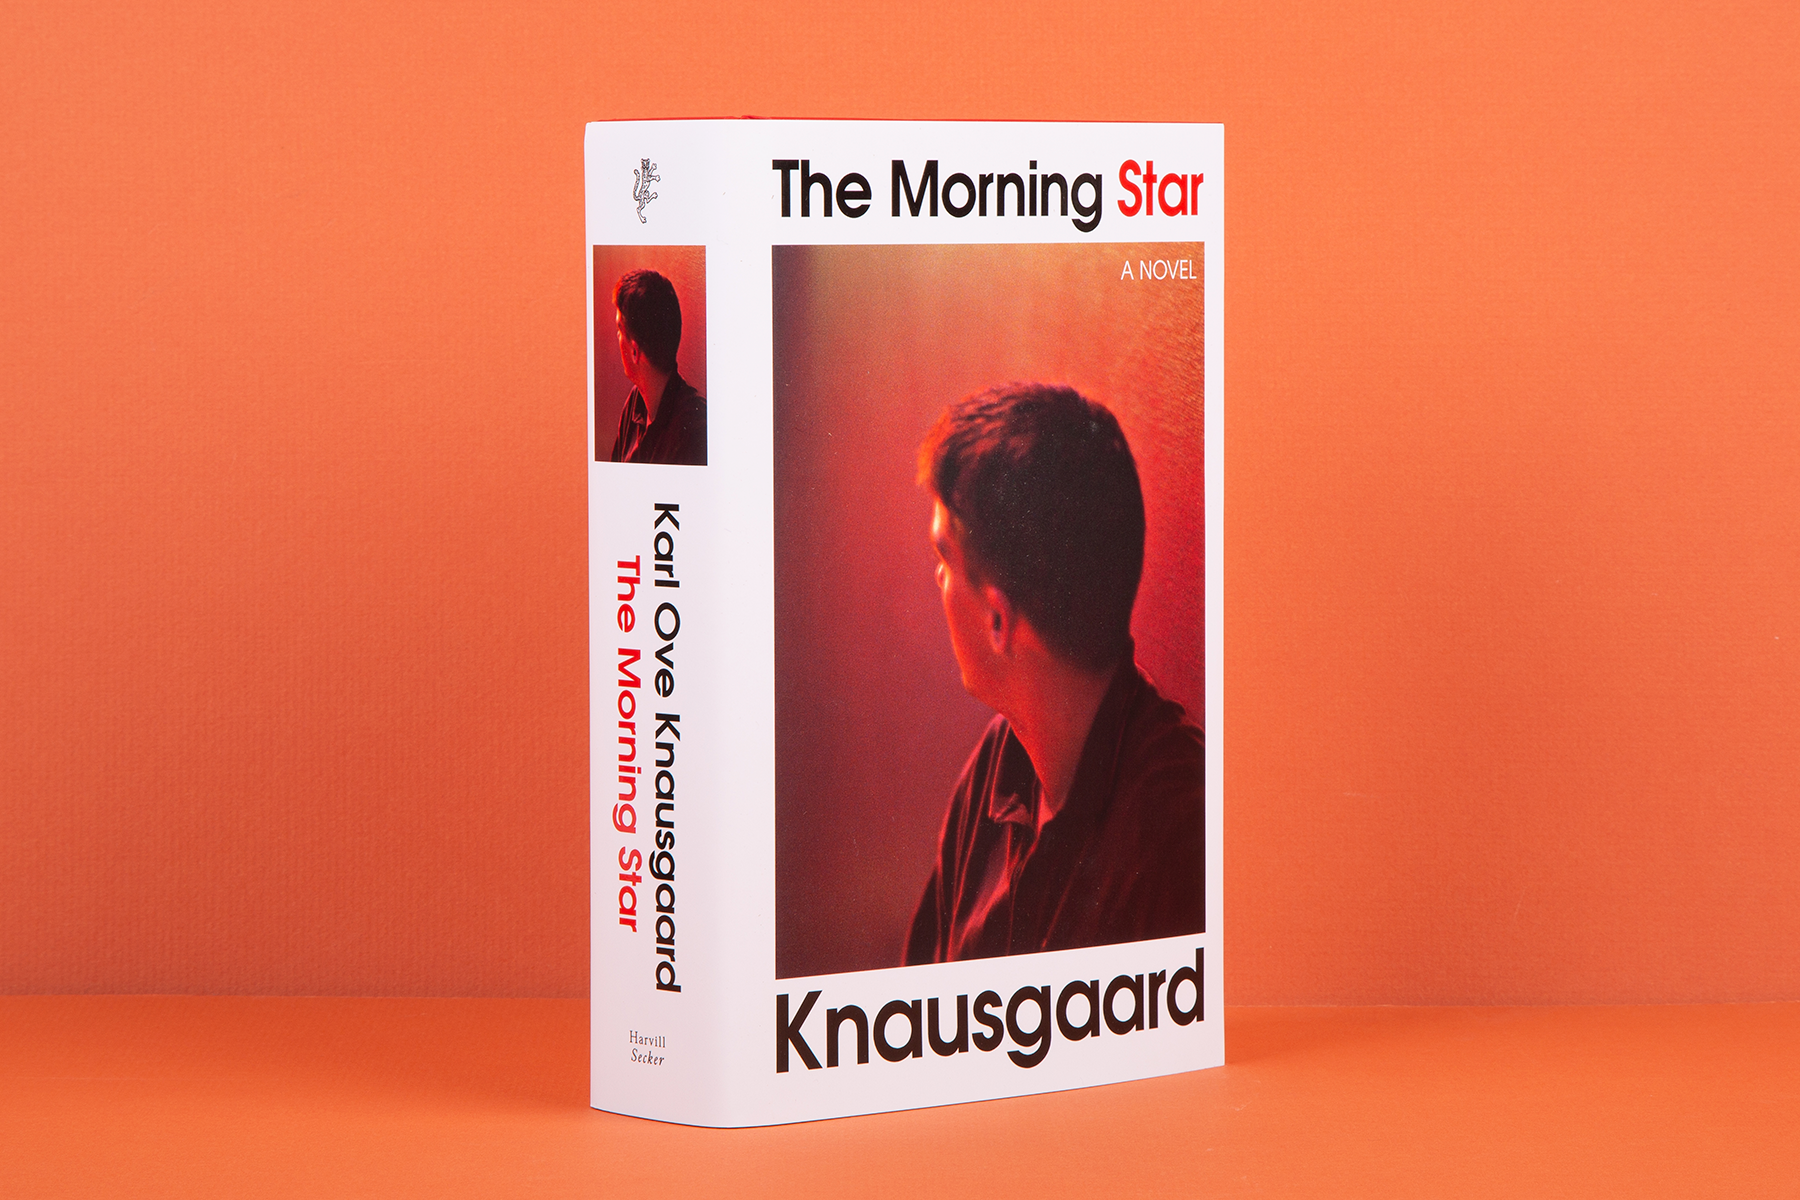 A photograph of Karl Ove Knausgaard's 'The Morning Star' against an orange background.